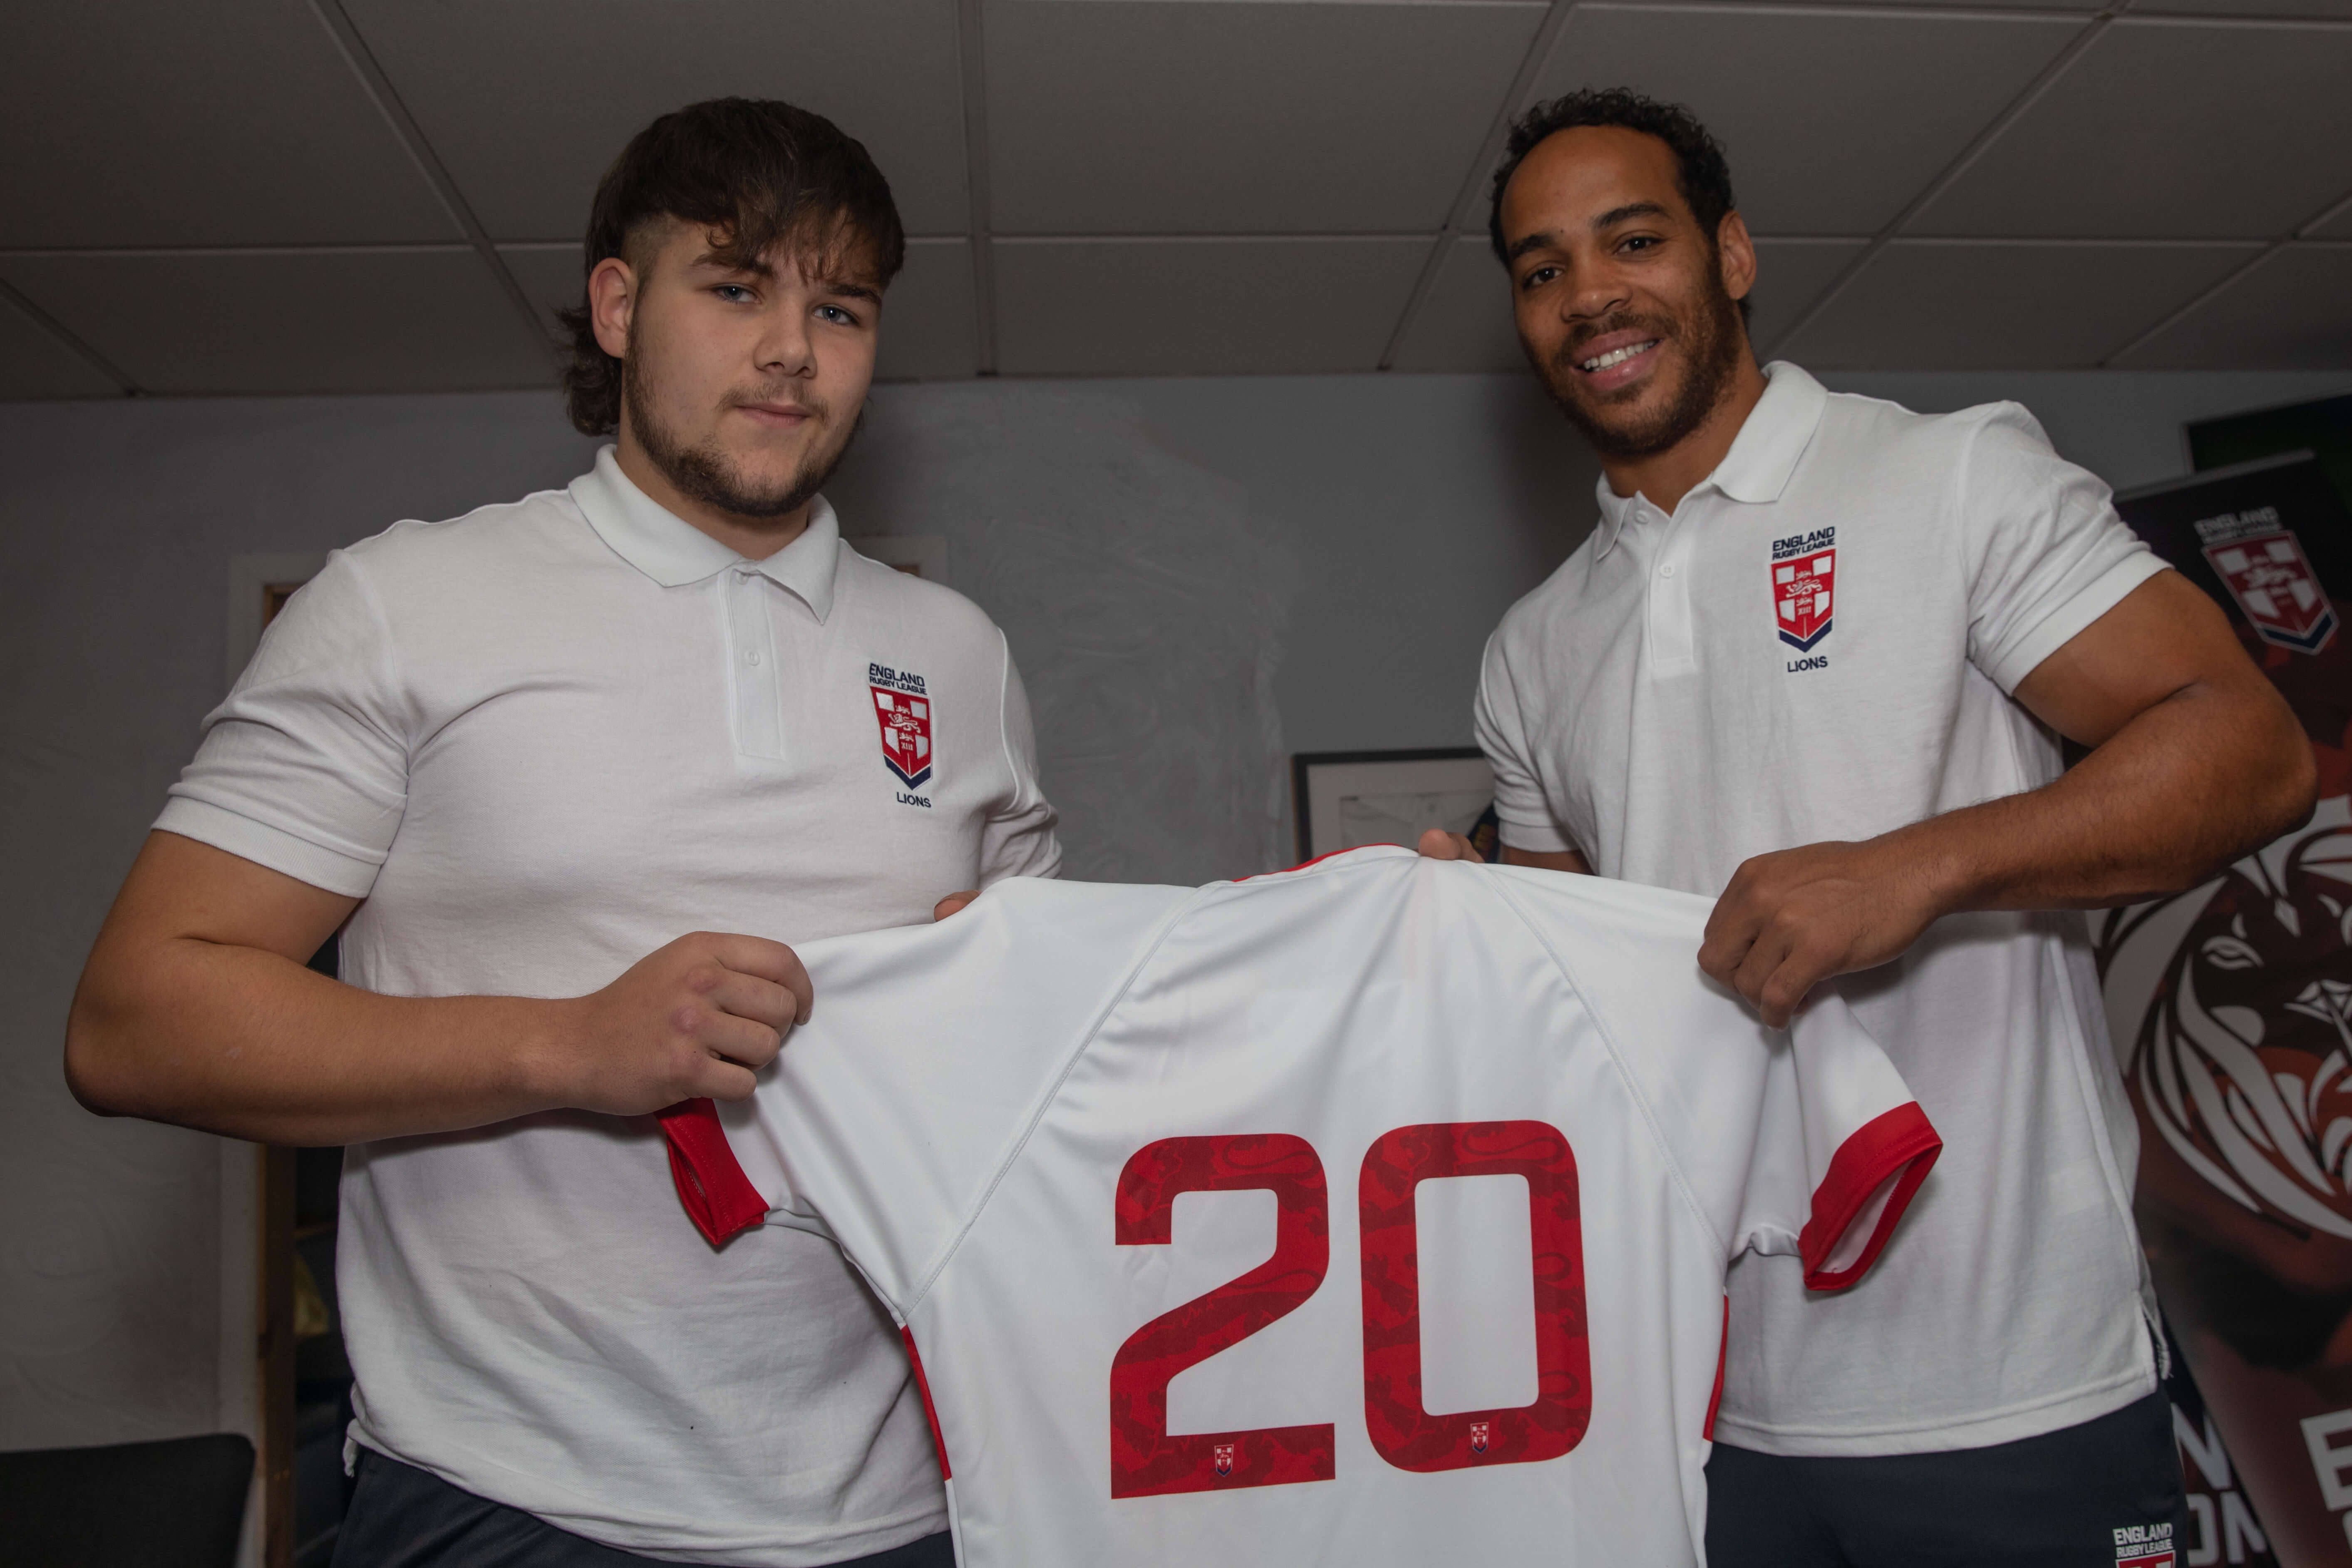 Dylan Turner (left) receives his No 20 England shirt (under-17s) from Huddersfield Giants stalwart and 300-plus games centre Leroy Cudjoe.